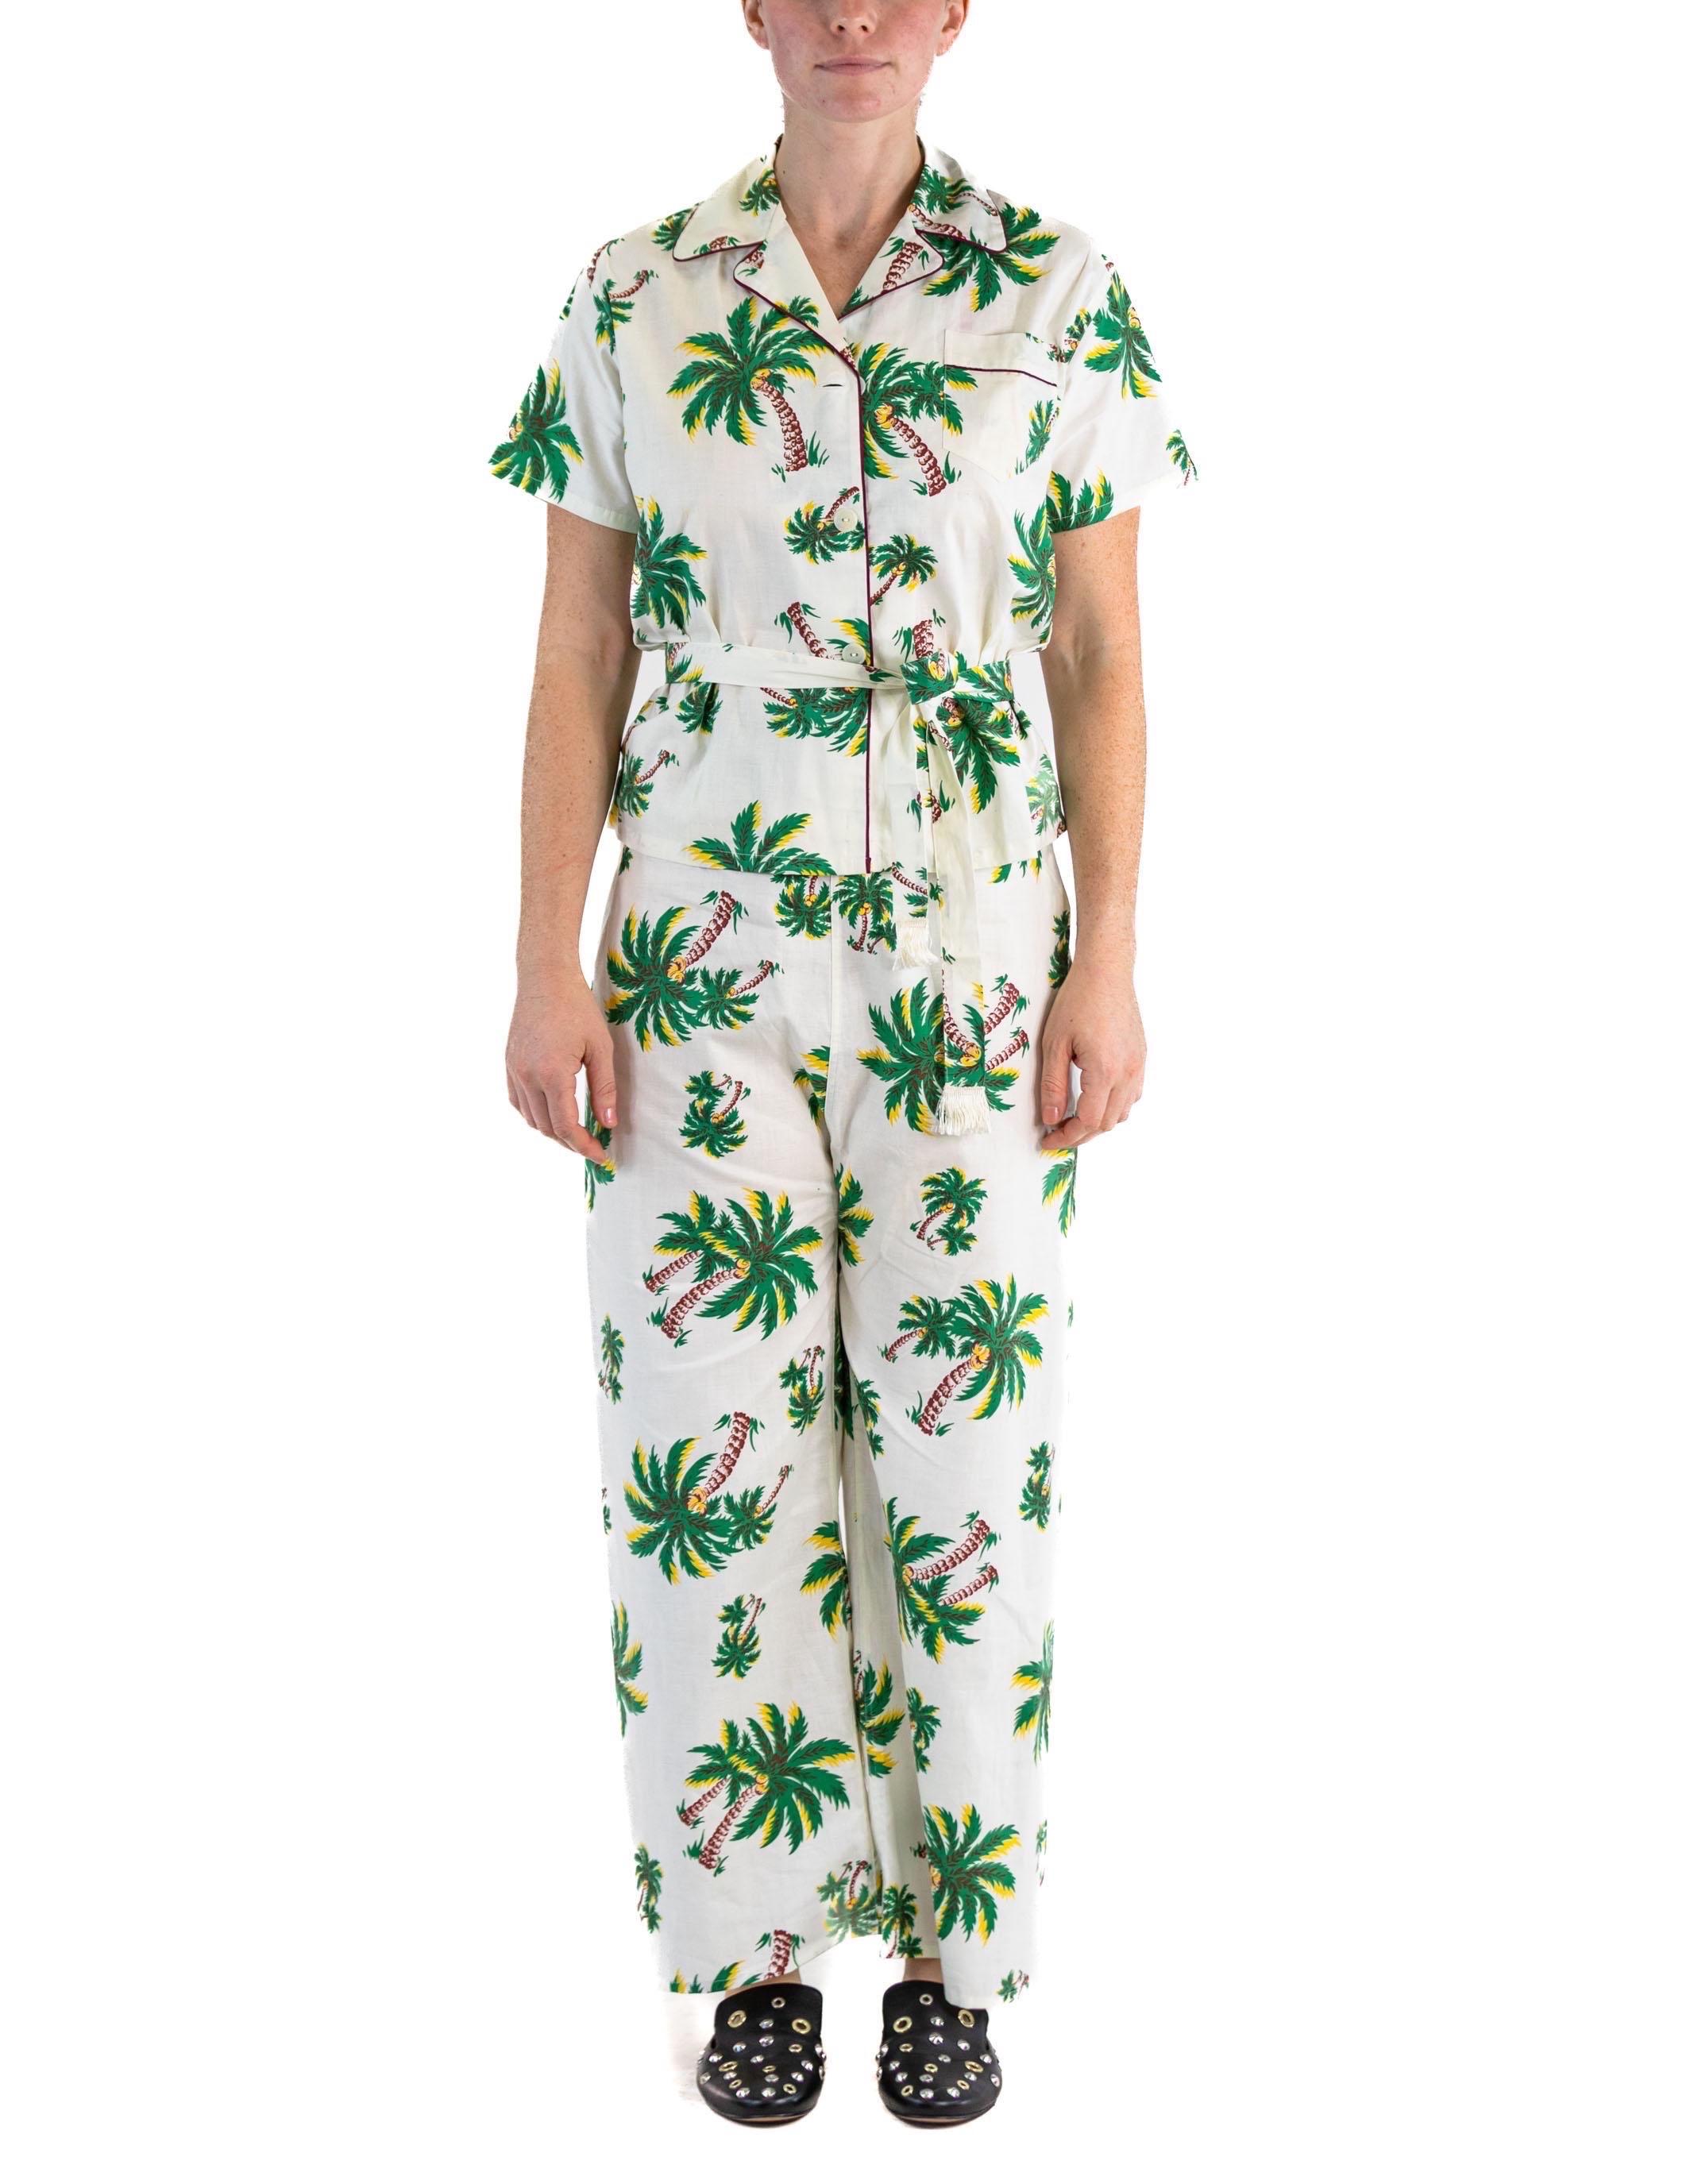 1940S CAROL BRENT White Deadstock Cotton Palm Tree Pajamas With Tassel Belt In Excellent Condition For Sale In New York, NY